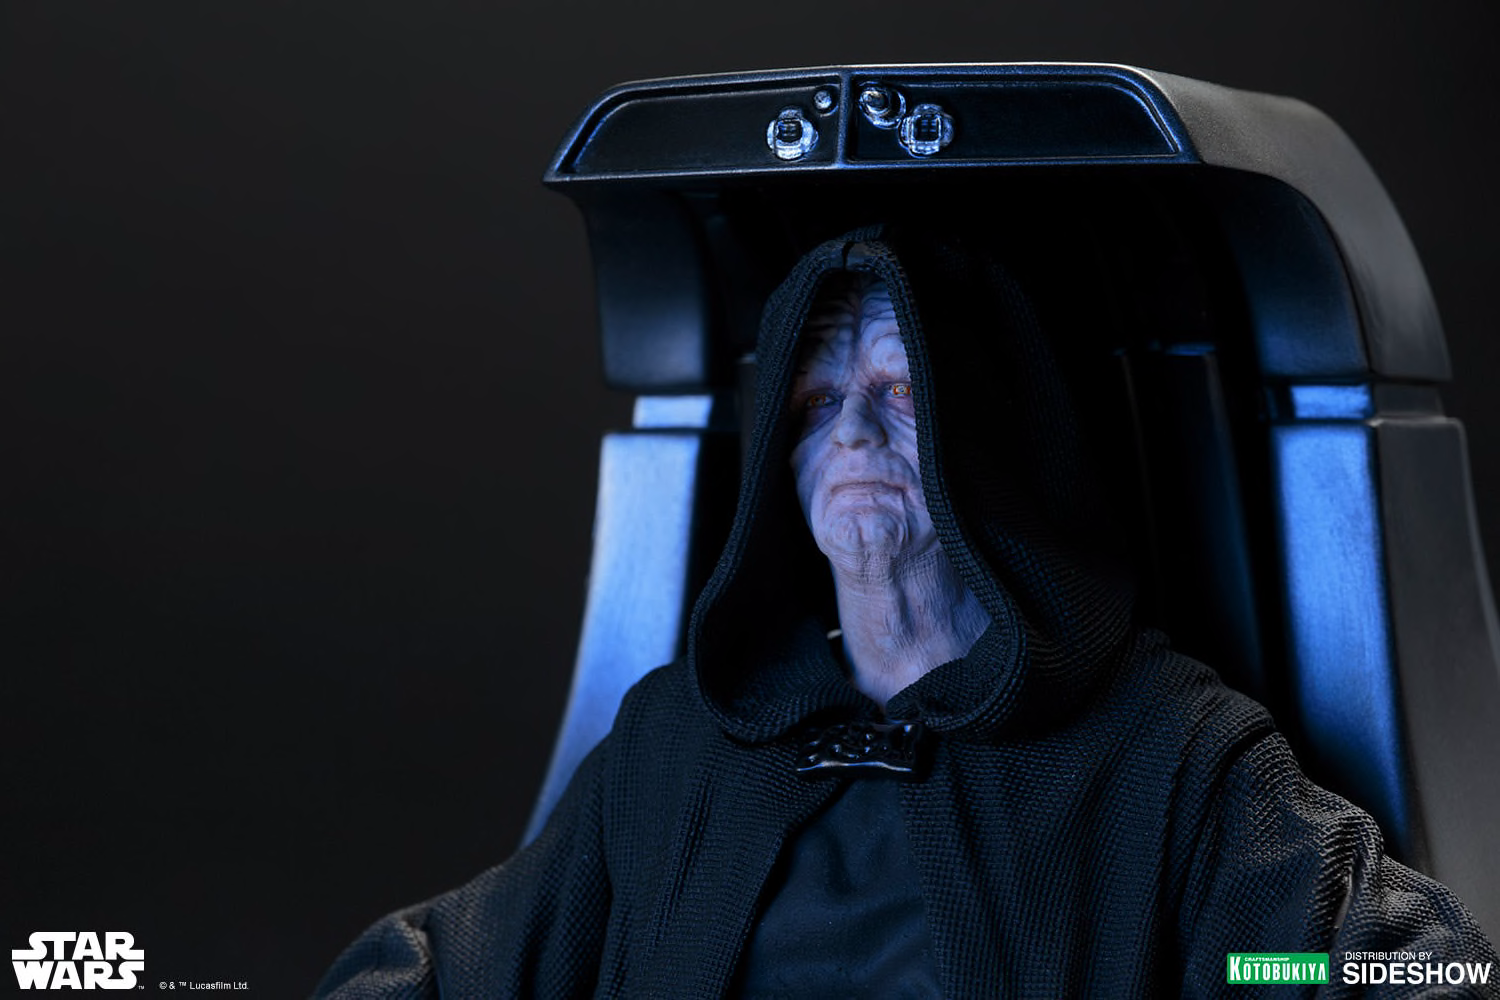 New Return of the Jedi Emperor Palpatine ARTFX+ Statue available for pre-order!